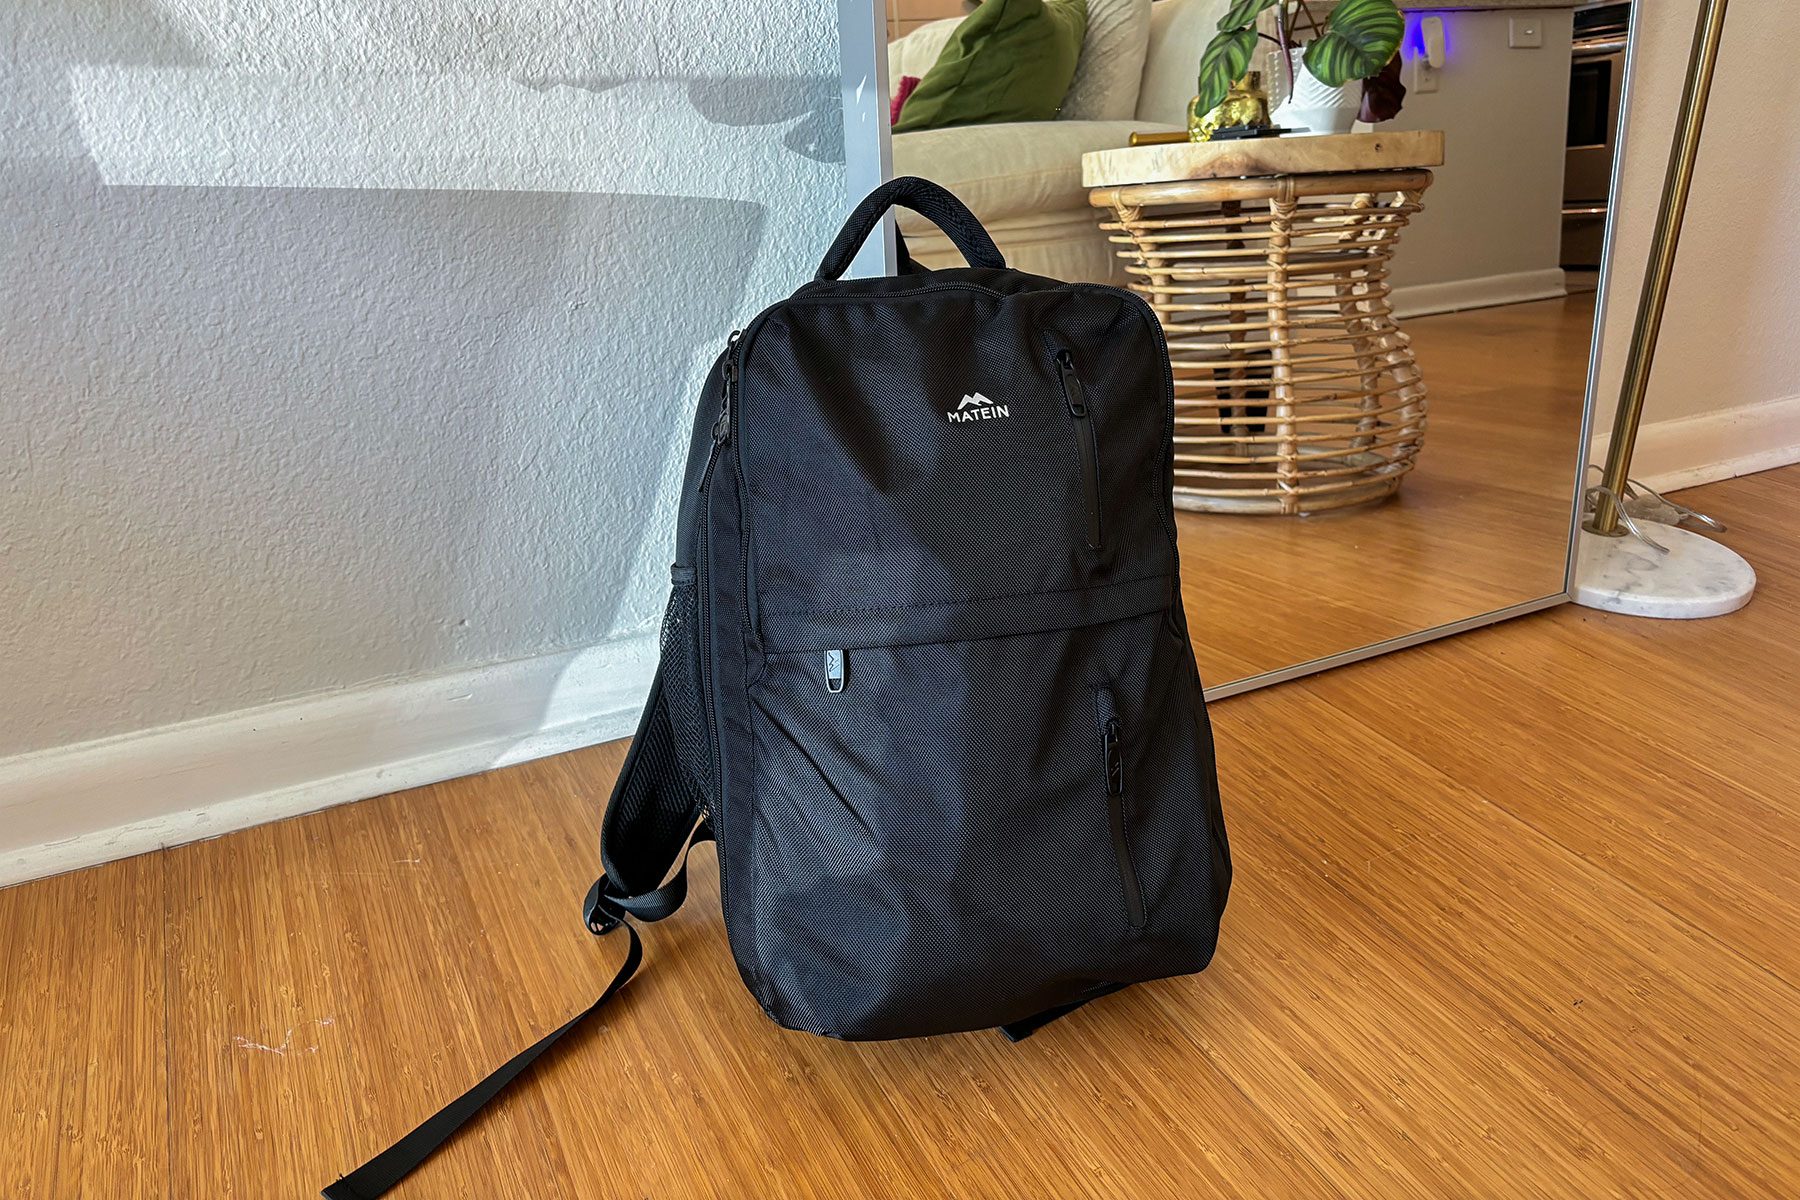 A black backpack on a wood floor